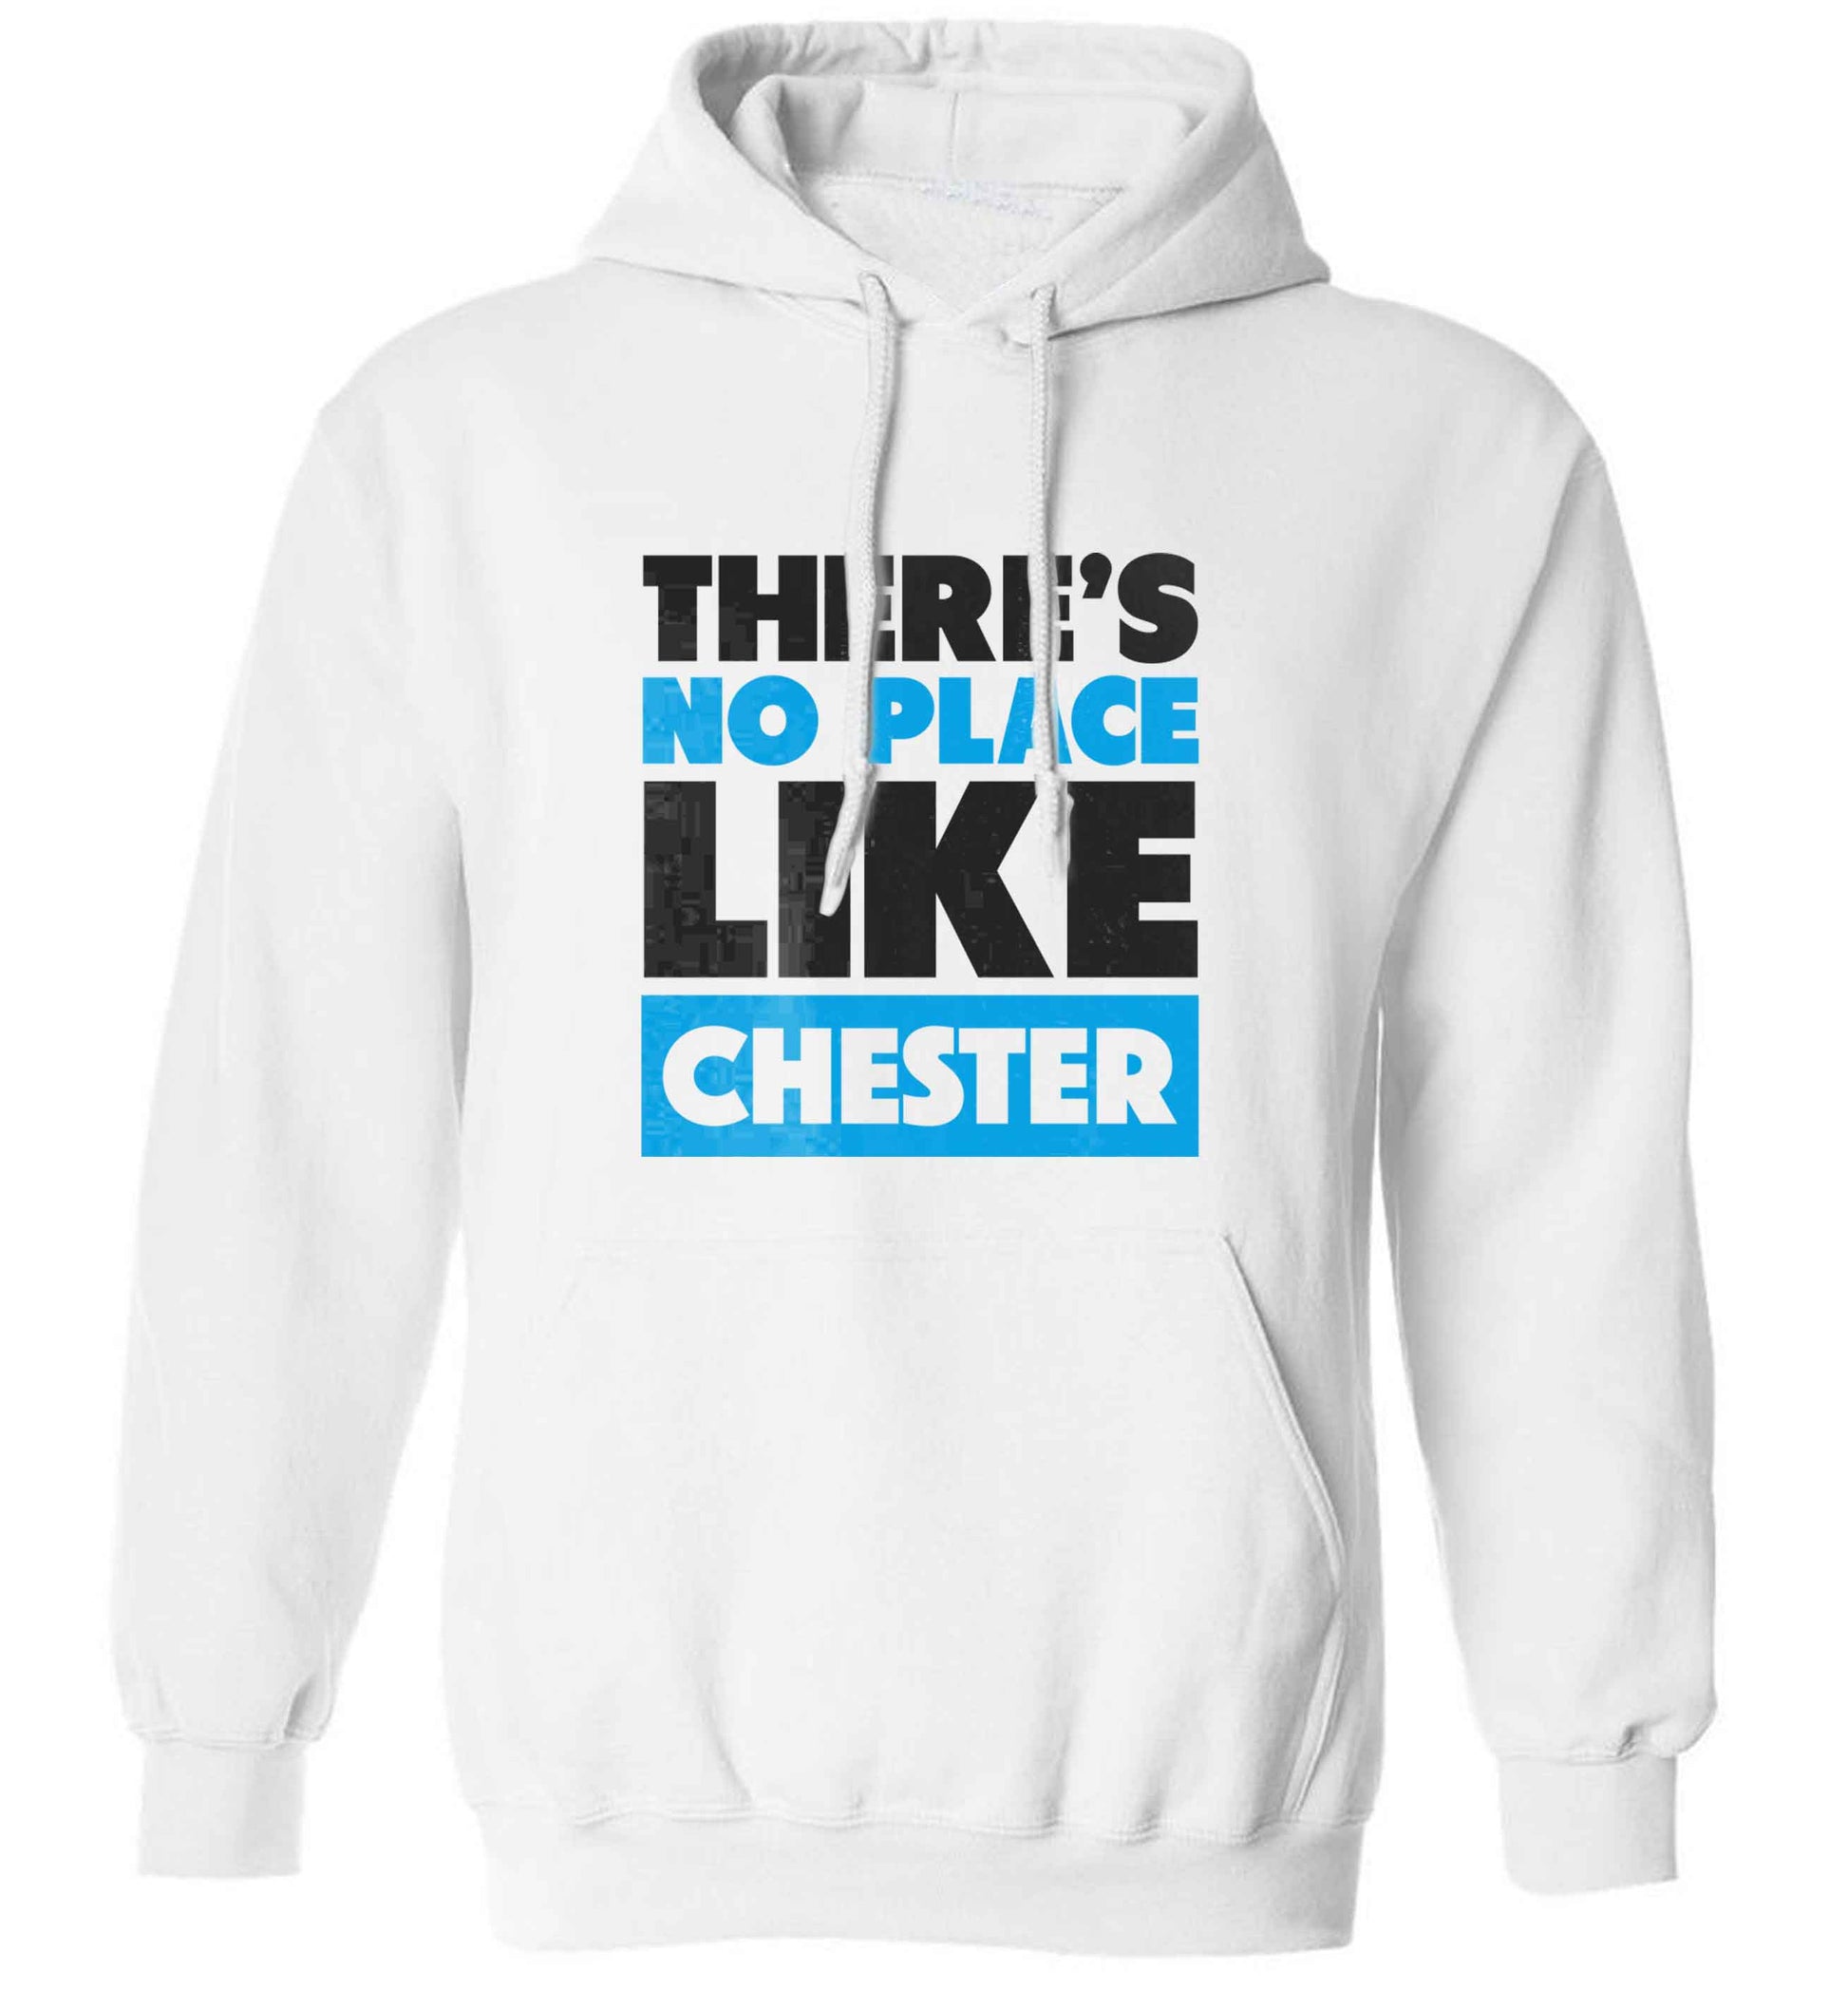 There's no place like Chester adults unisex white hoodie 2XL